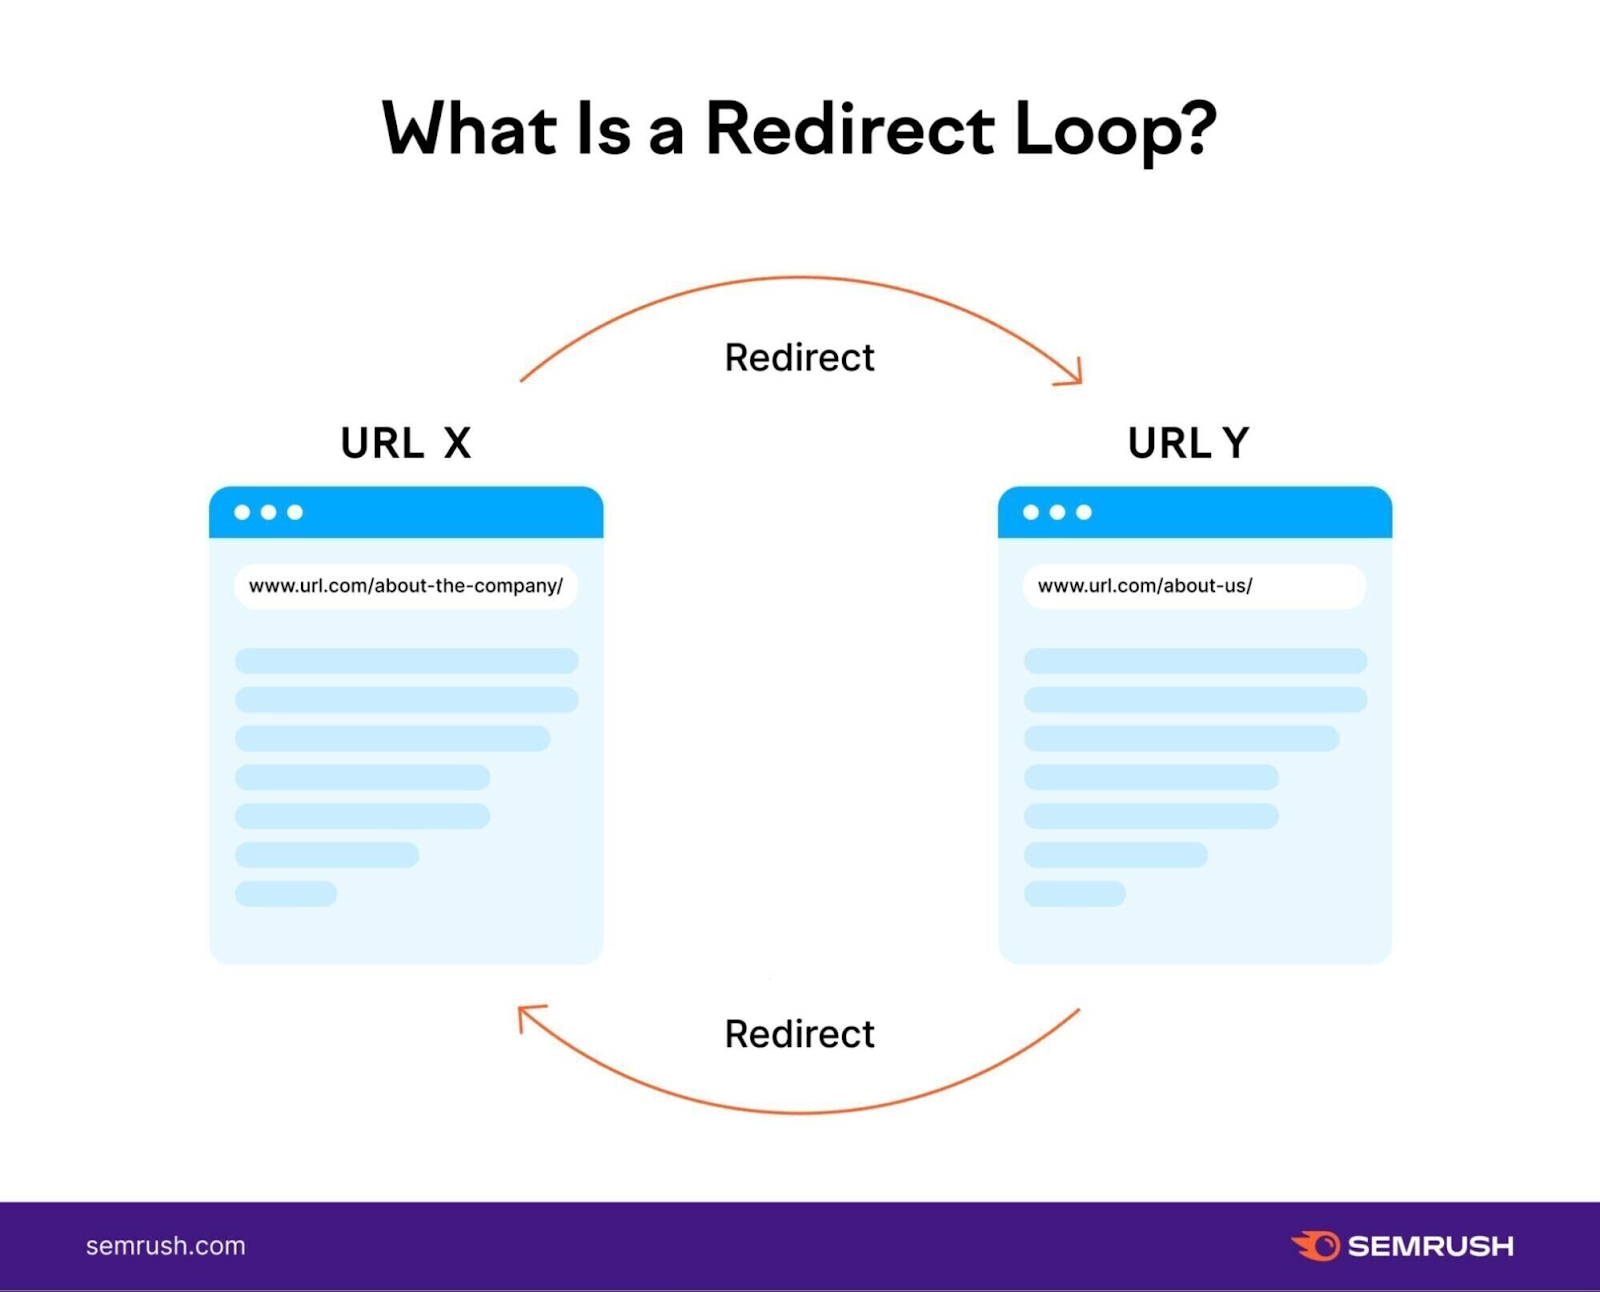 "What is a redirect loop?" infographic by Semrush